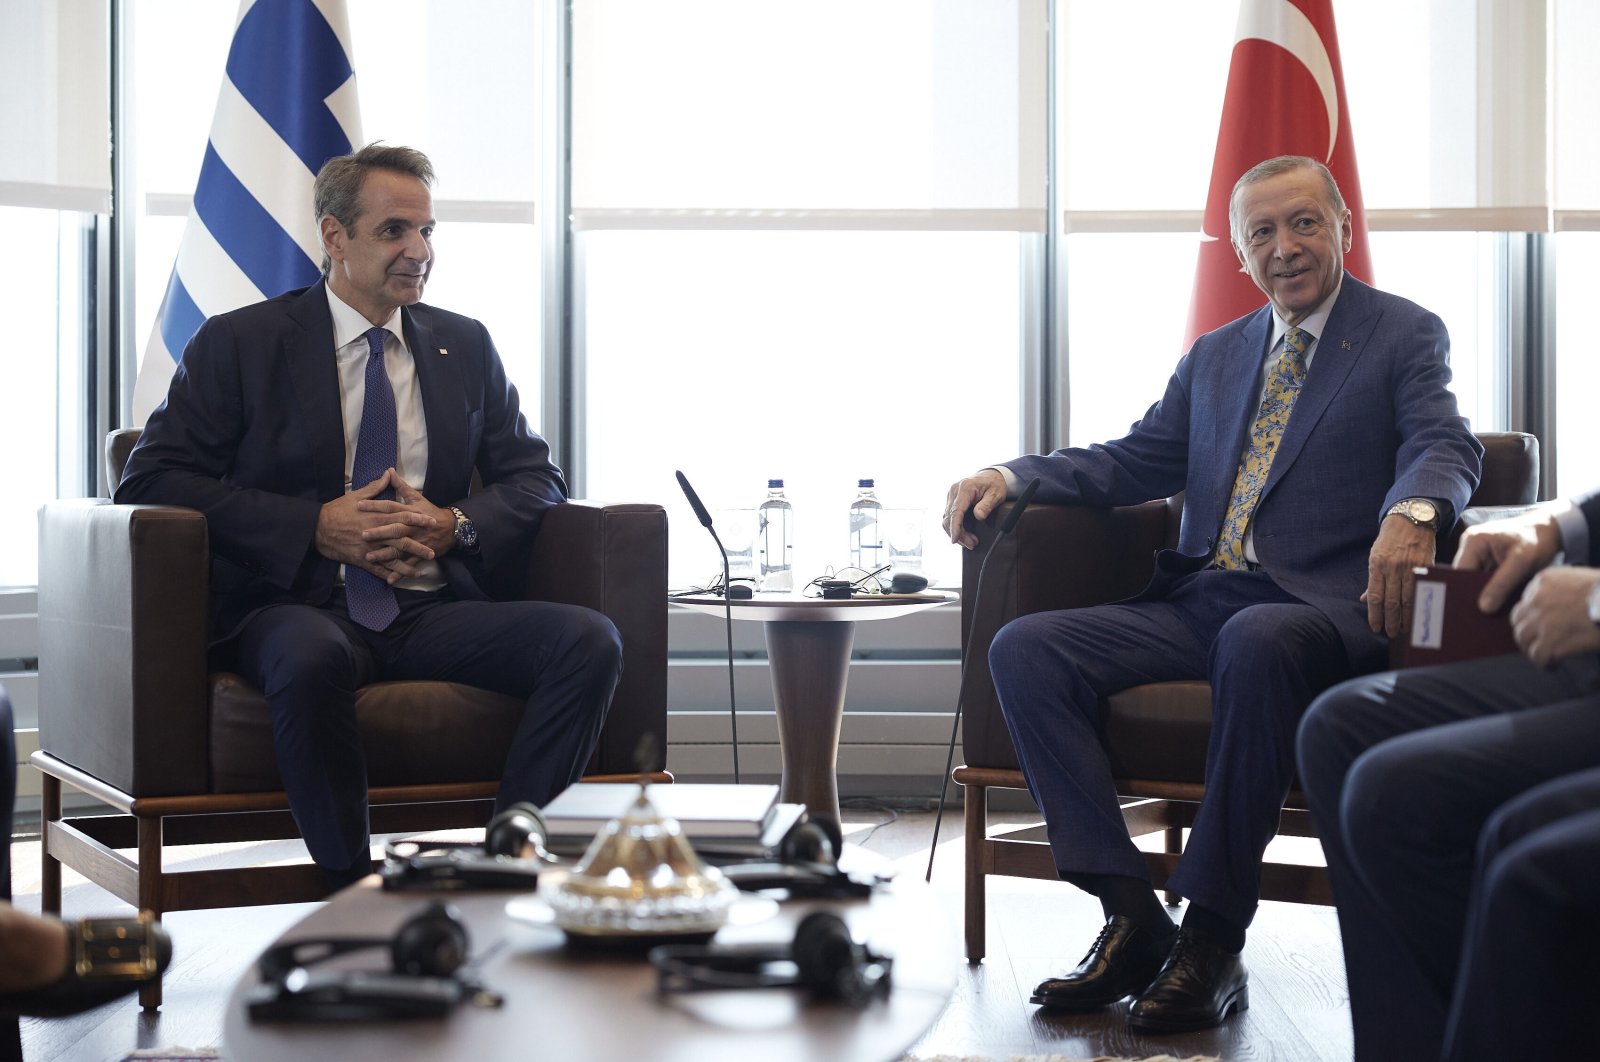 President Recep Tayyip Erdoğan (R) meets with Greek Prime Minister Kyriakos Mitsotakis on the sidelines of the United Nations General Assembly in New York, U.S., Sept. 20, 2023. (AP Photo)